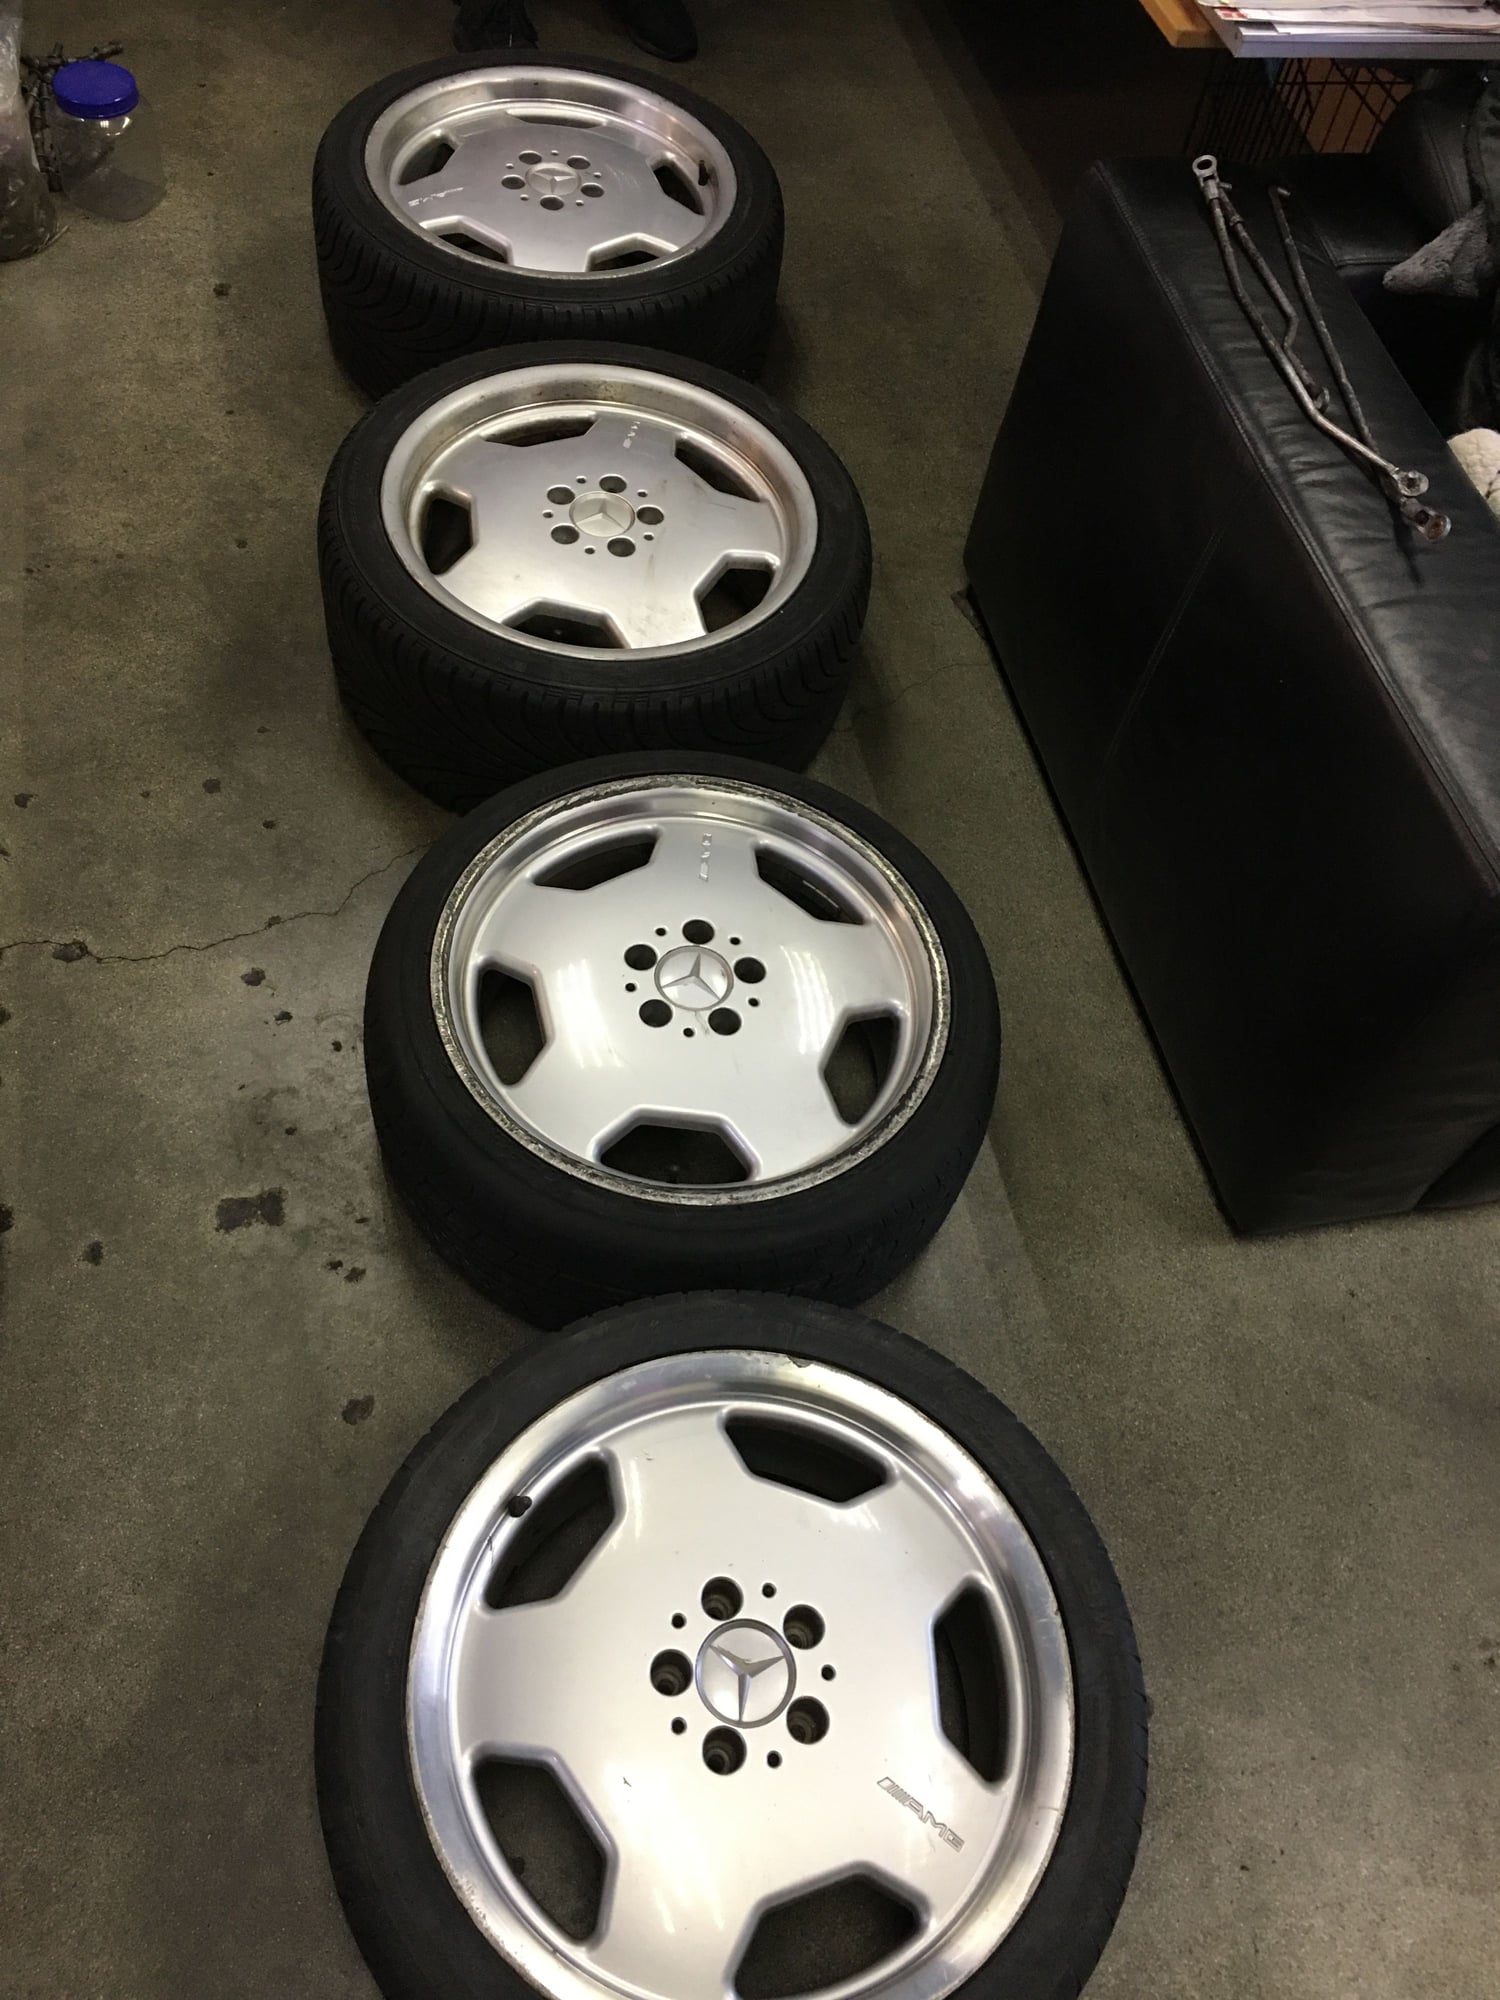 Wheels and Tires/Axles - AMG 18" Monoblocks-Staggered - Used - 1985 to 2003 Mercedes-Benz All Models - Foothill Ranch, CA 92610, United States